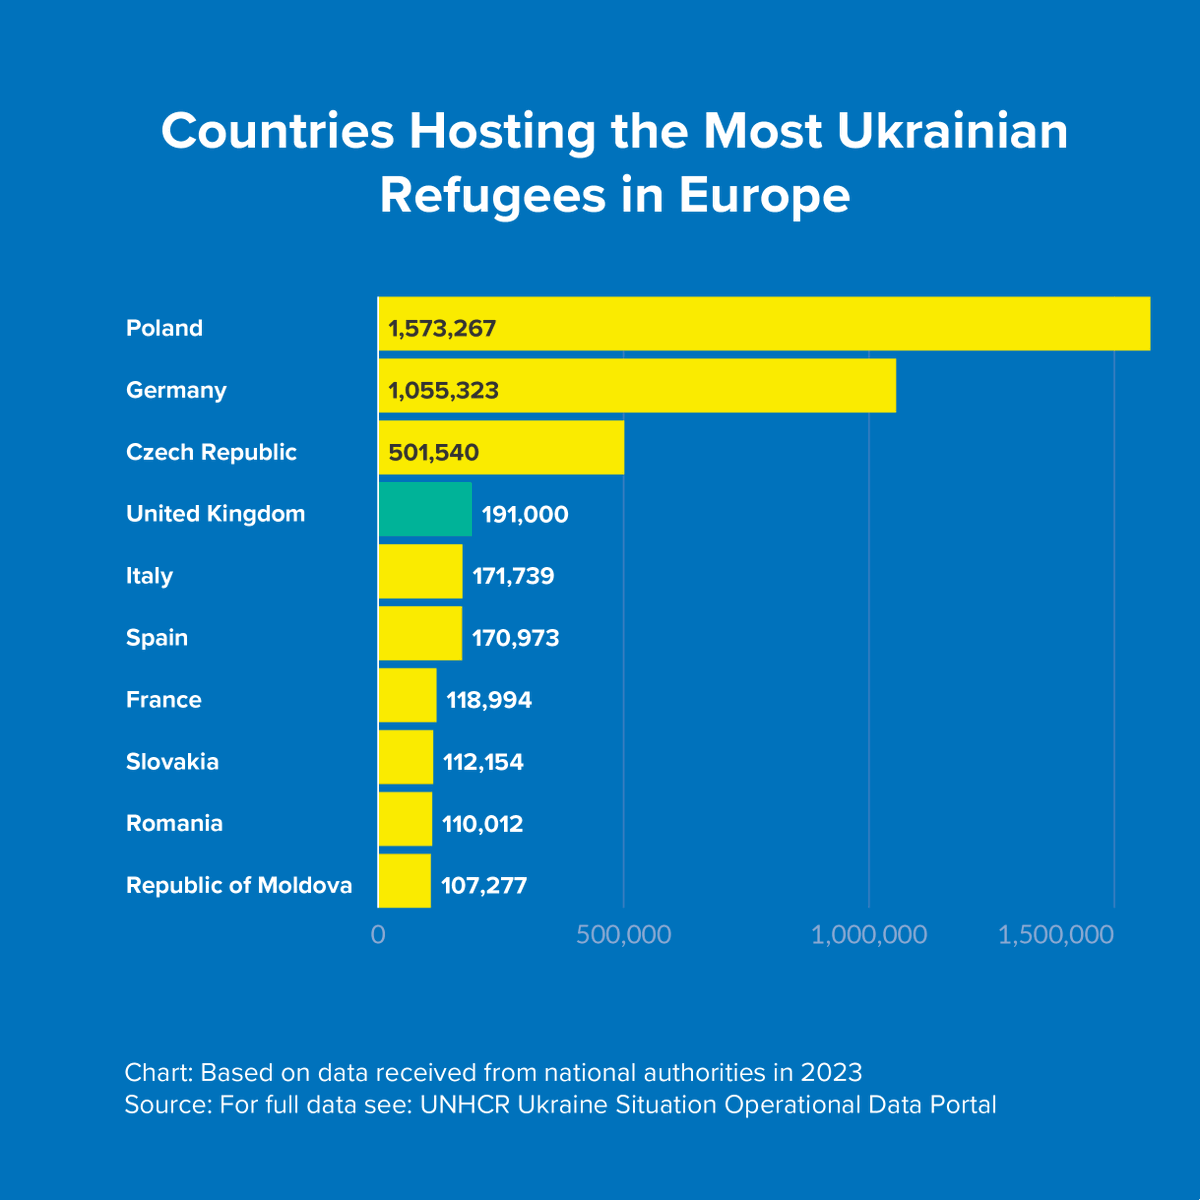 The UK has commendably provided protection to over 191,000 Ukrainians under the Ukraine visa schemes. But safe and regular pathways for other refugees are severely limited. Our latest Fact Sheet➡️ unhcr.org/641c7acc4